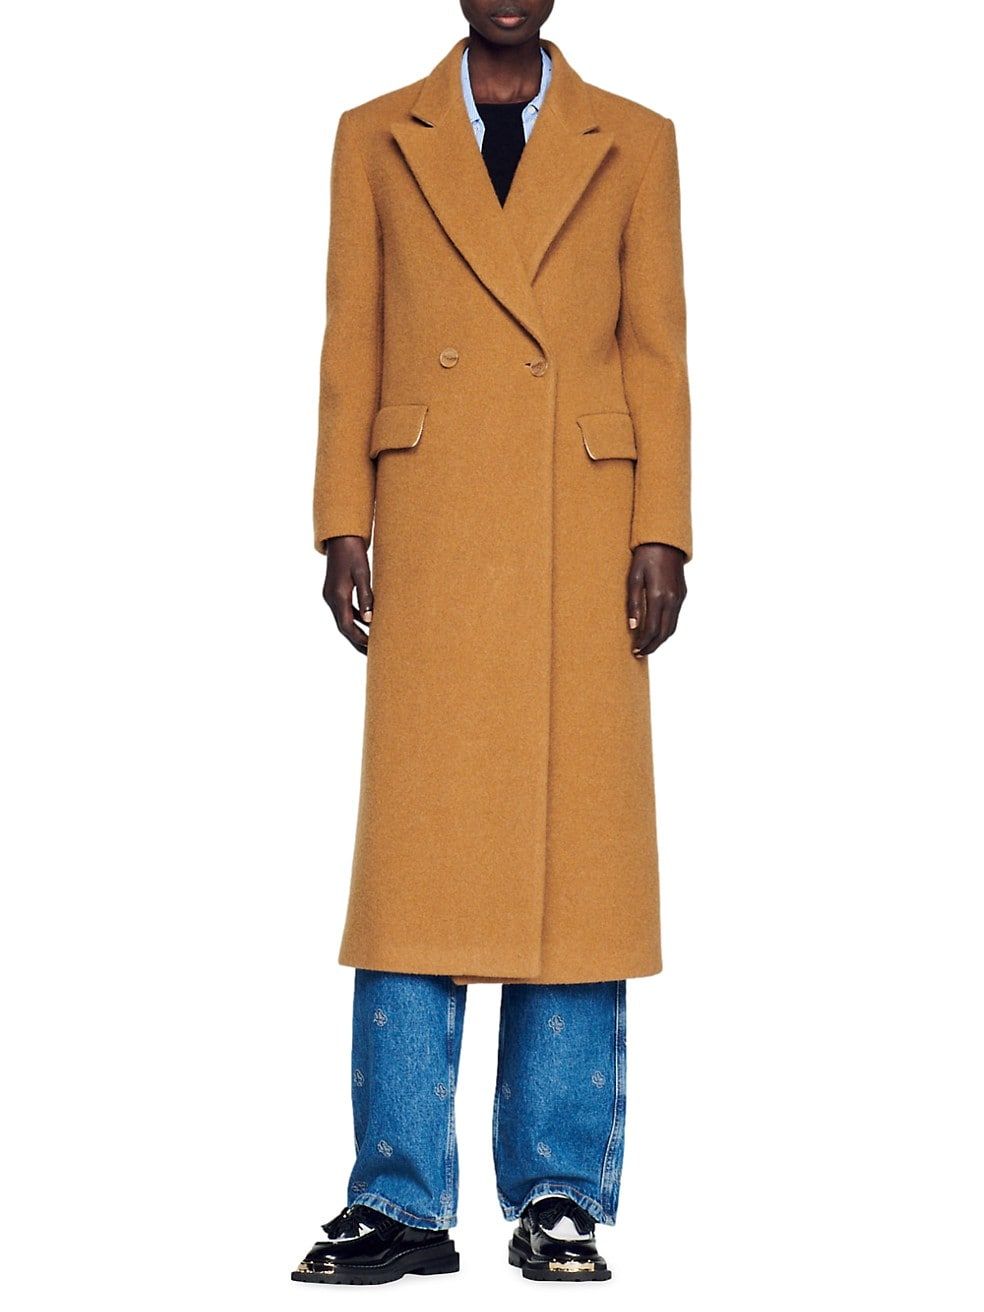 Sandro Riccardo Long Double-Breasted Brushed Wool Coat | Saks Fifth Avenue